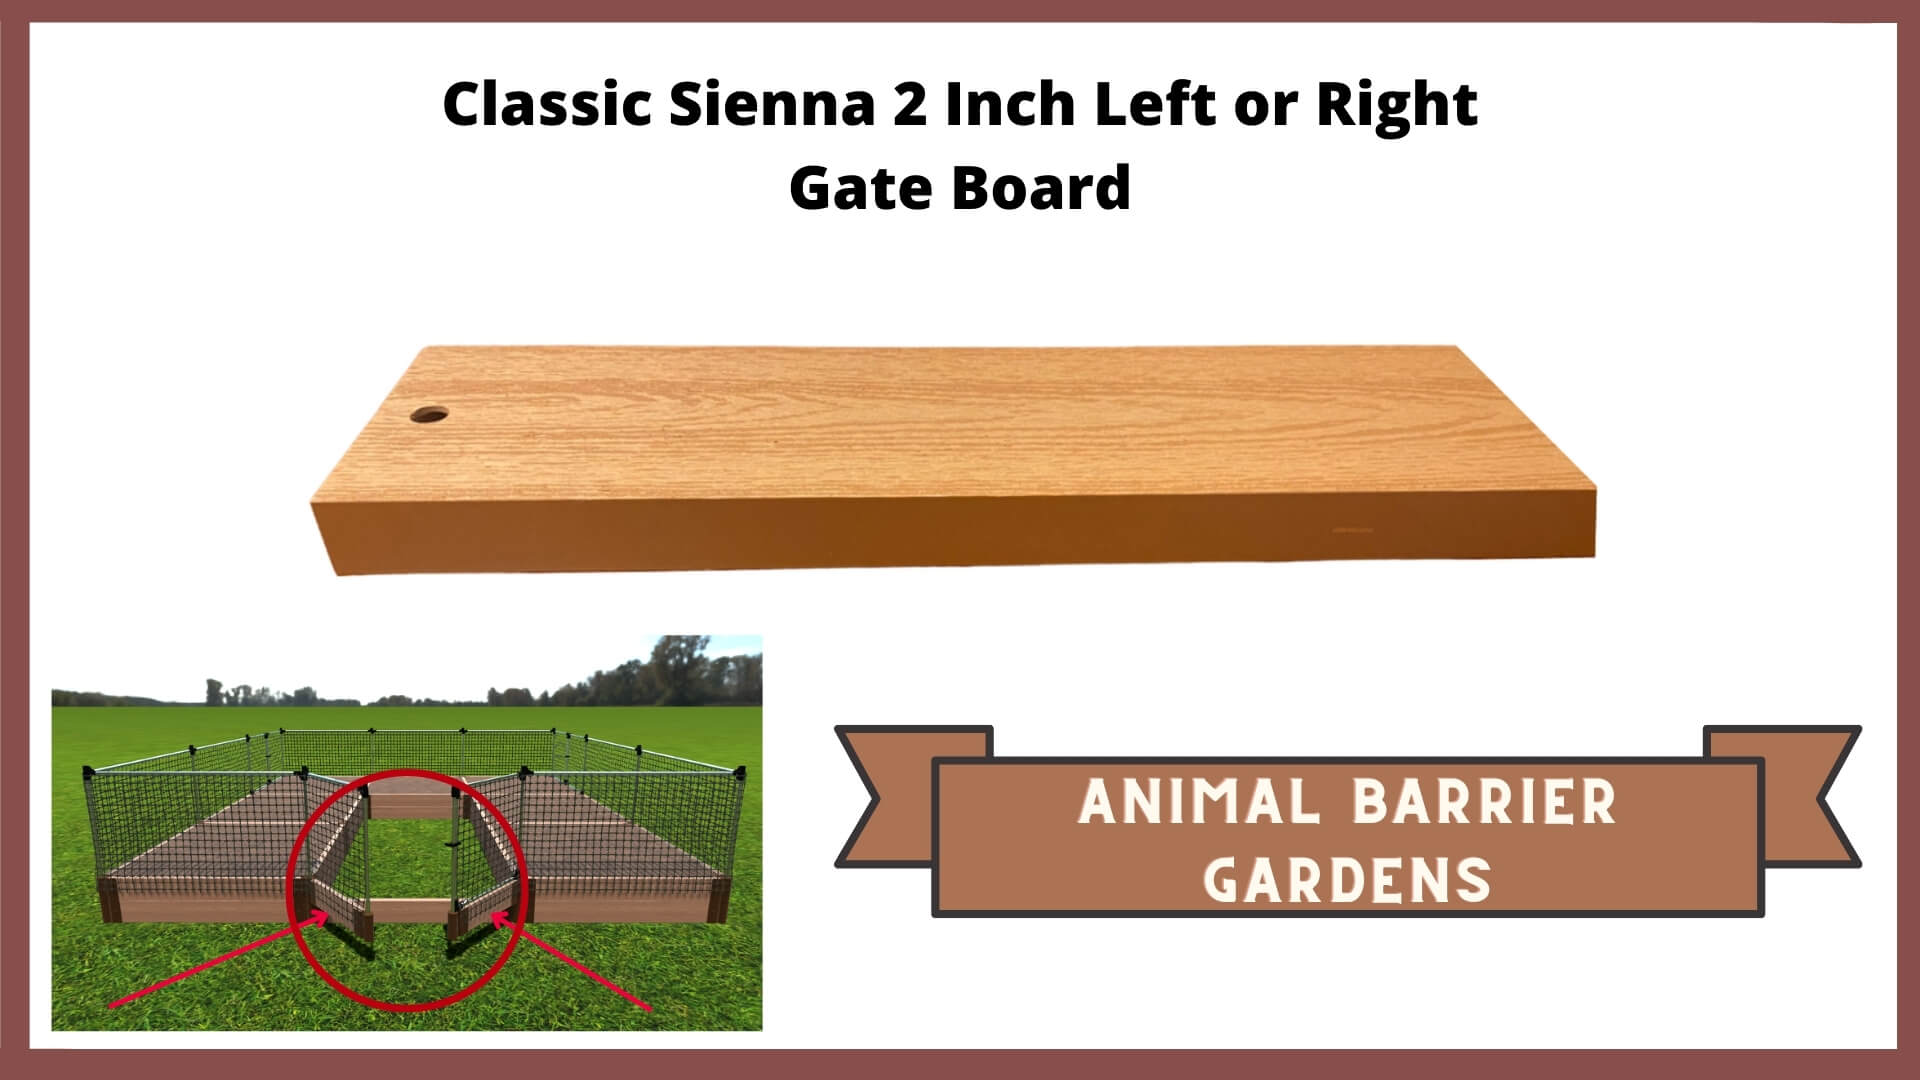 REPLACEMENT PARTS for: Stack & Extend Animal Barrier Kits & Gardens Accessories Frame It All Classic Sienna 2 Inch Left or Right Gate Board 